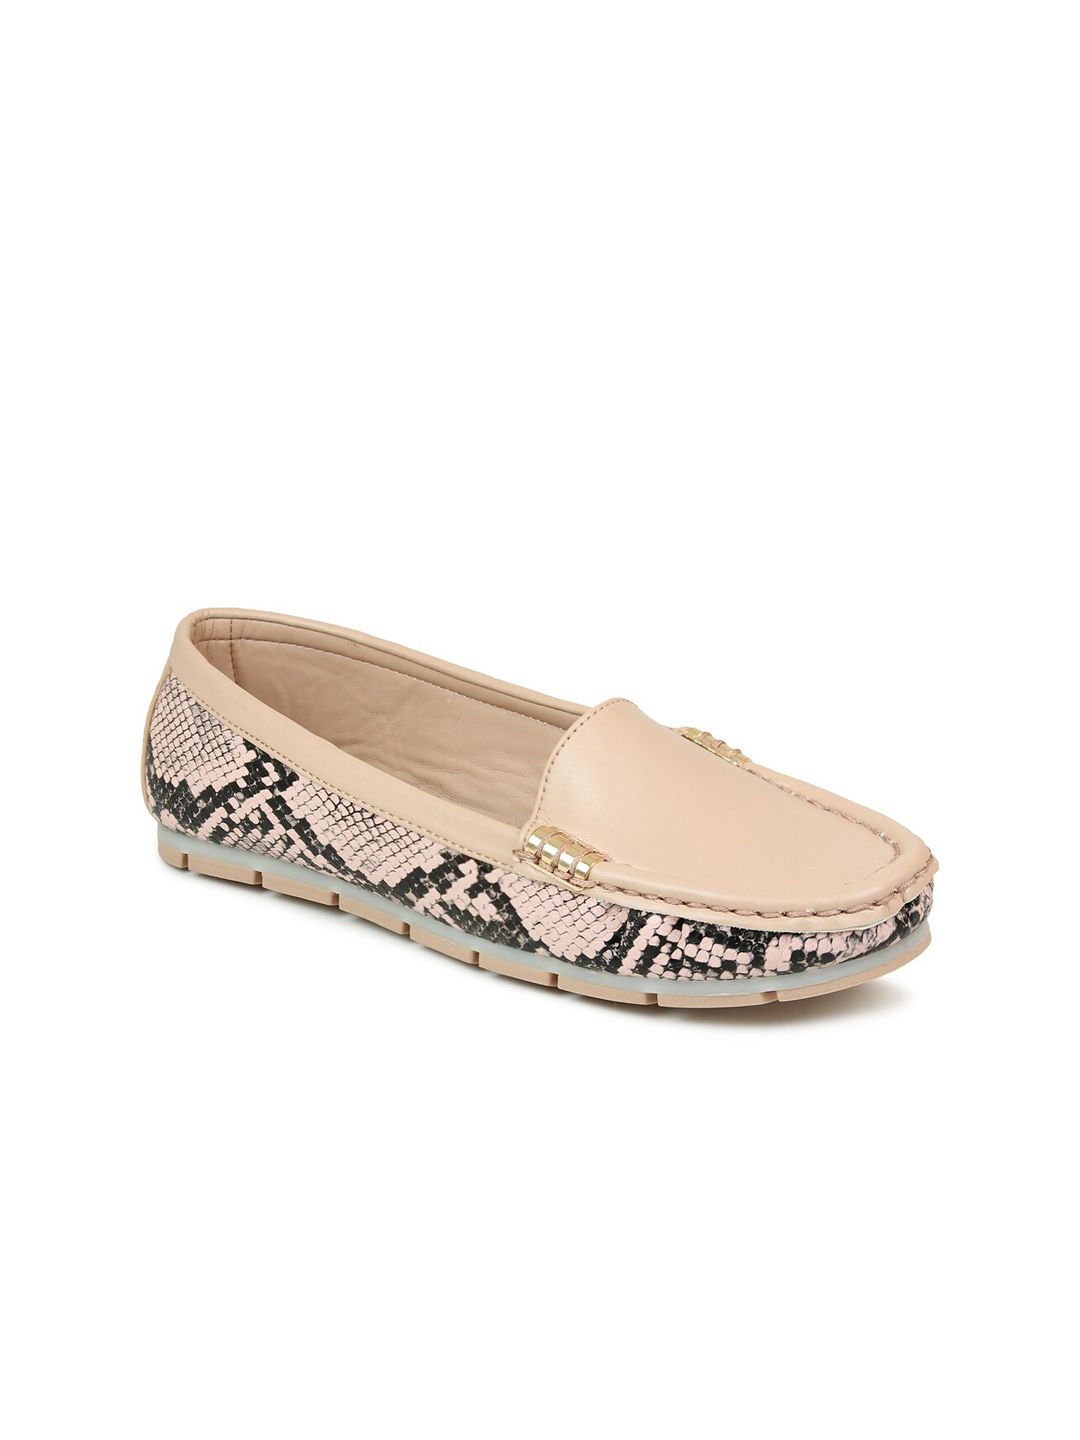 Inc 5 Women Printed Loafers Price in India